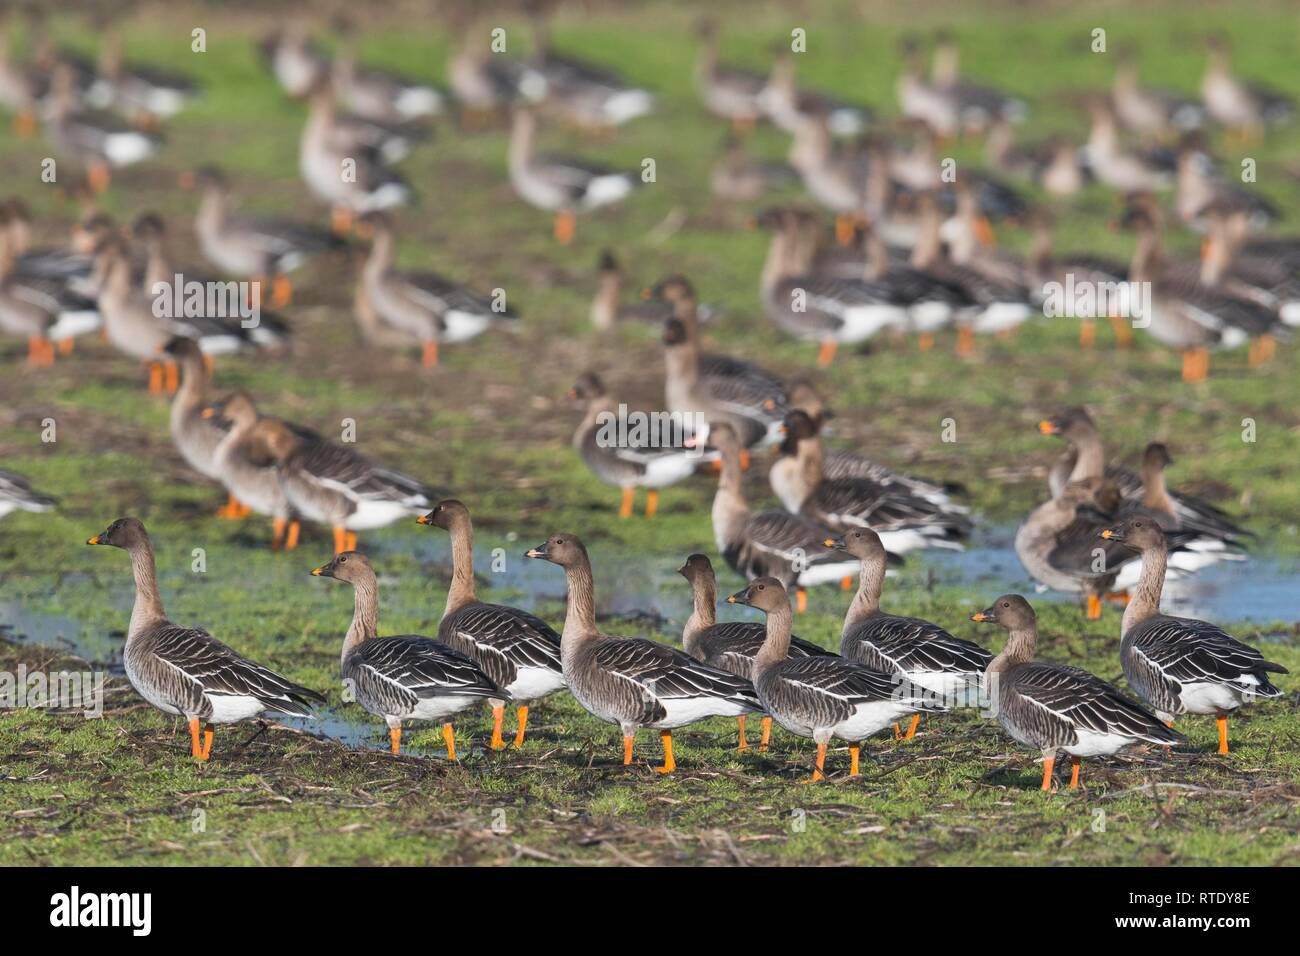 Bean Geese (Anser fabalis), flock of birds gathering on meadow, winter visitors, Emsland, Lower Saxony, Germany Stock Photo